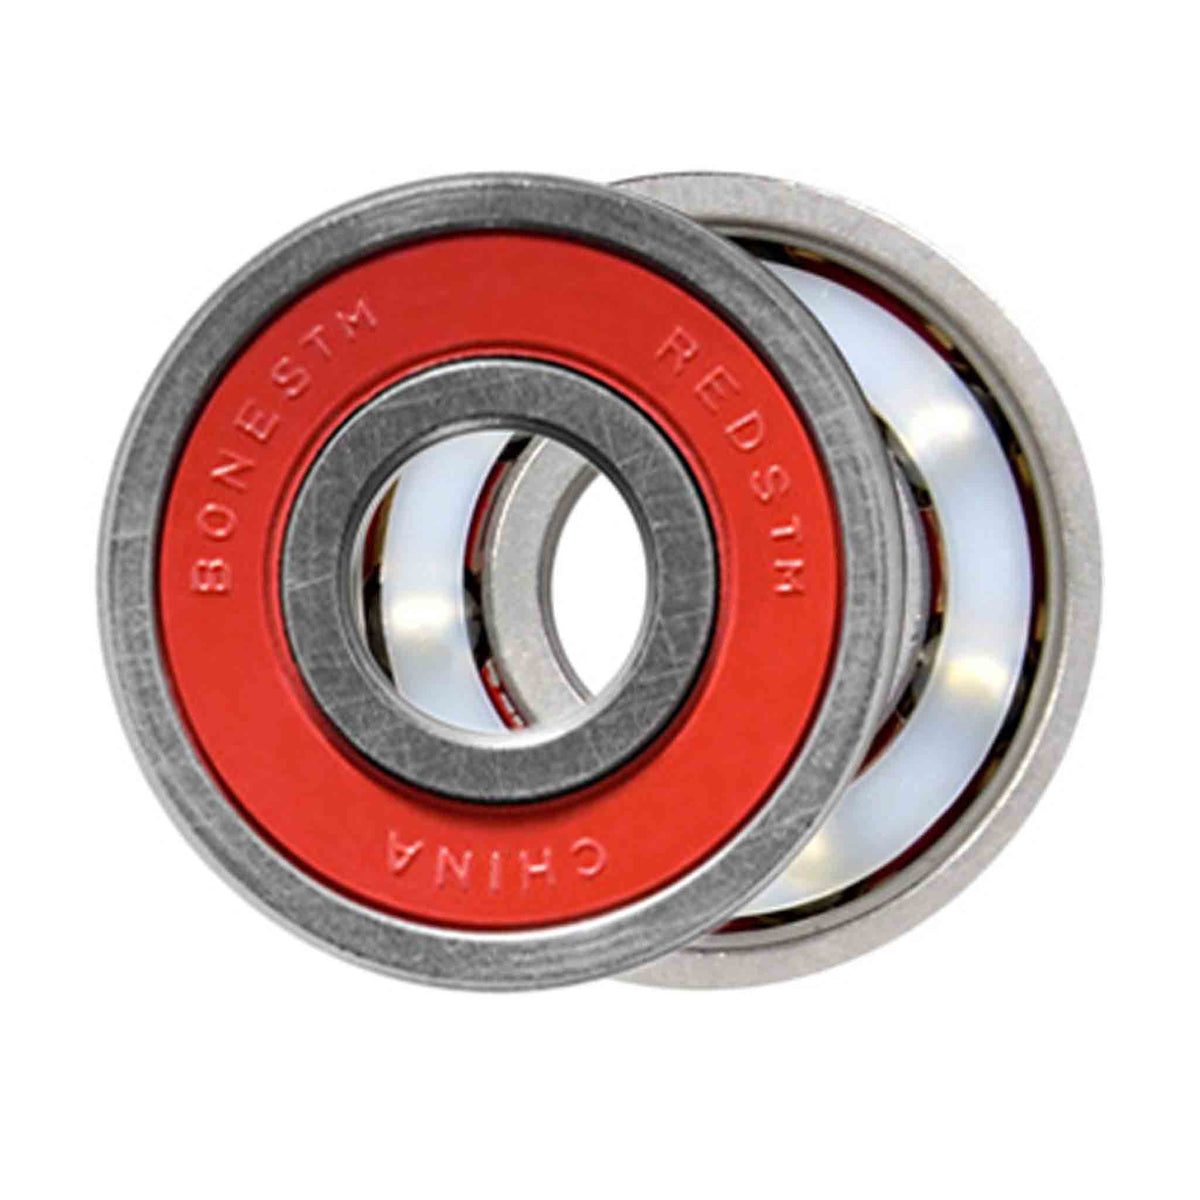 Reds Bearings Pack of 8 - Bones Reds - Roller Skates Parts and Accessories | JT Skate